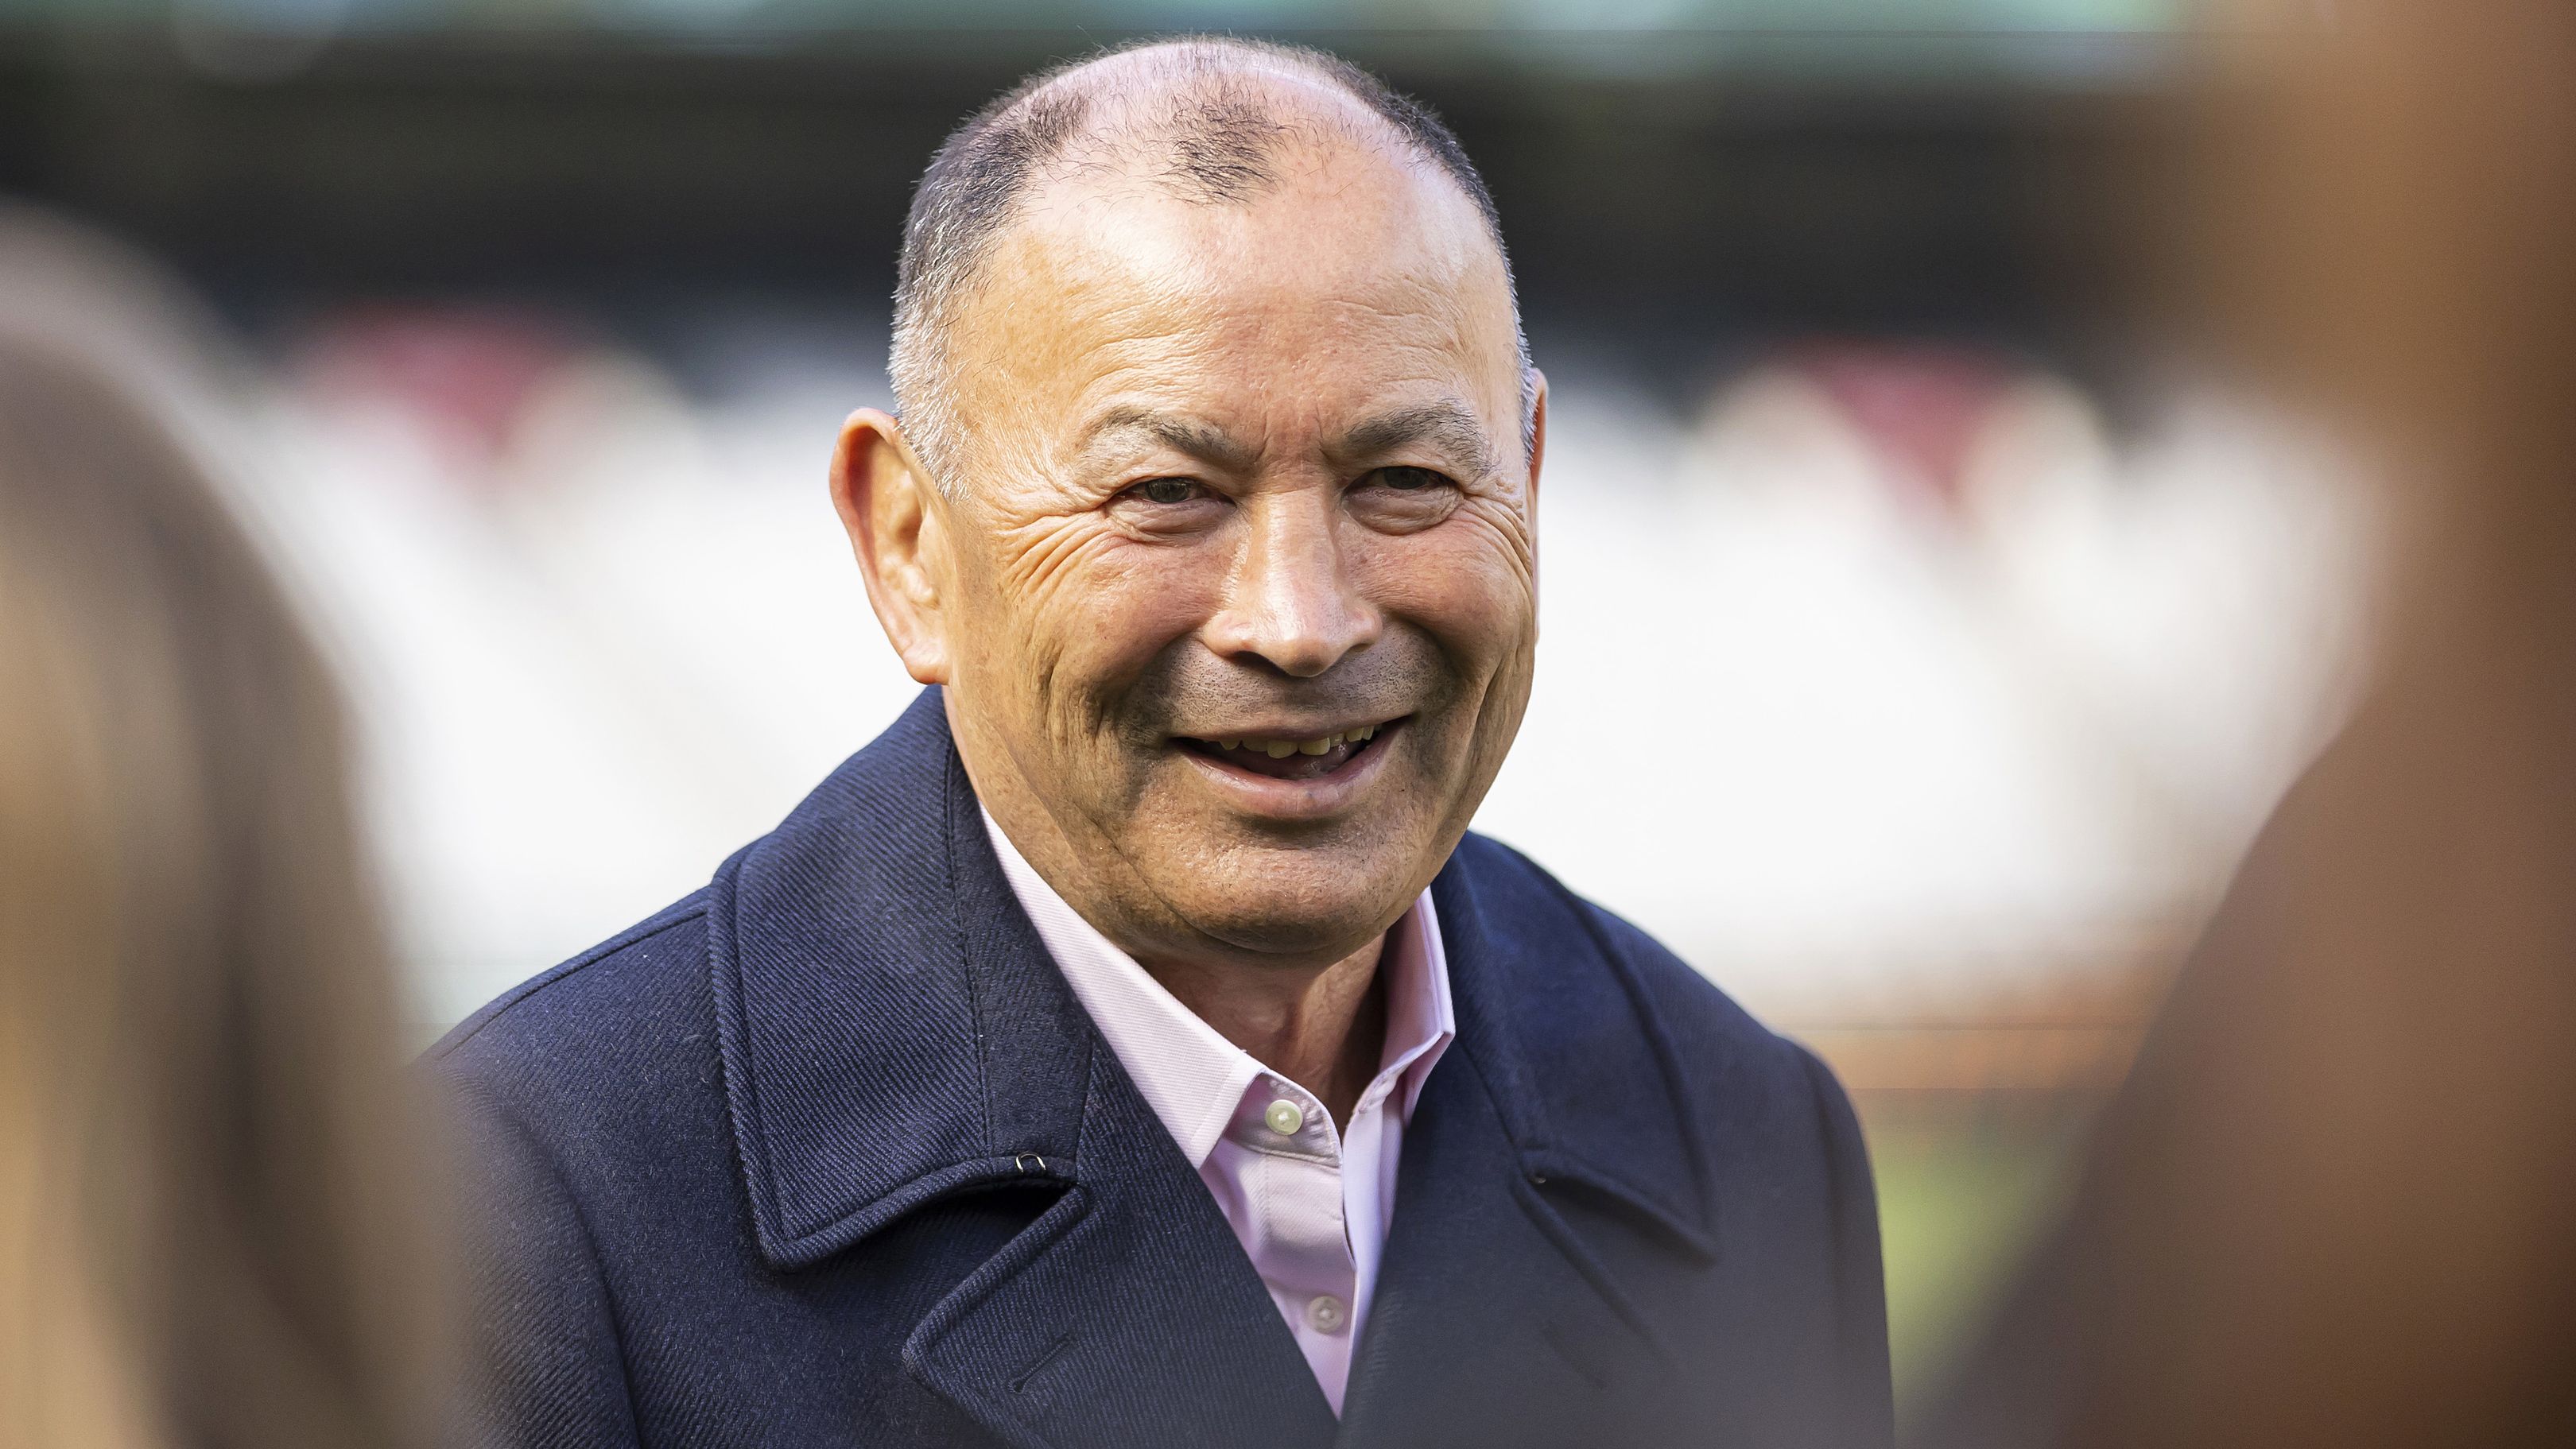 Wallabies head coach Eddie Jones speaks to the media during a Wallabies media opportunity at Melbourne Cricket Ground.